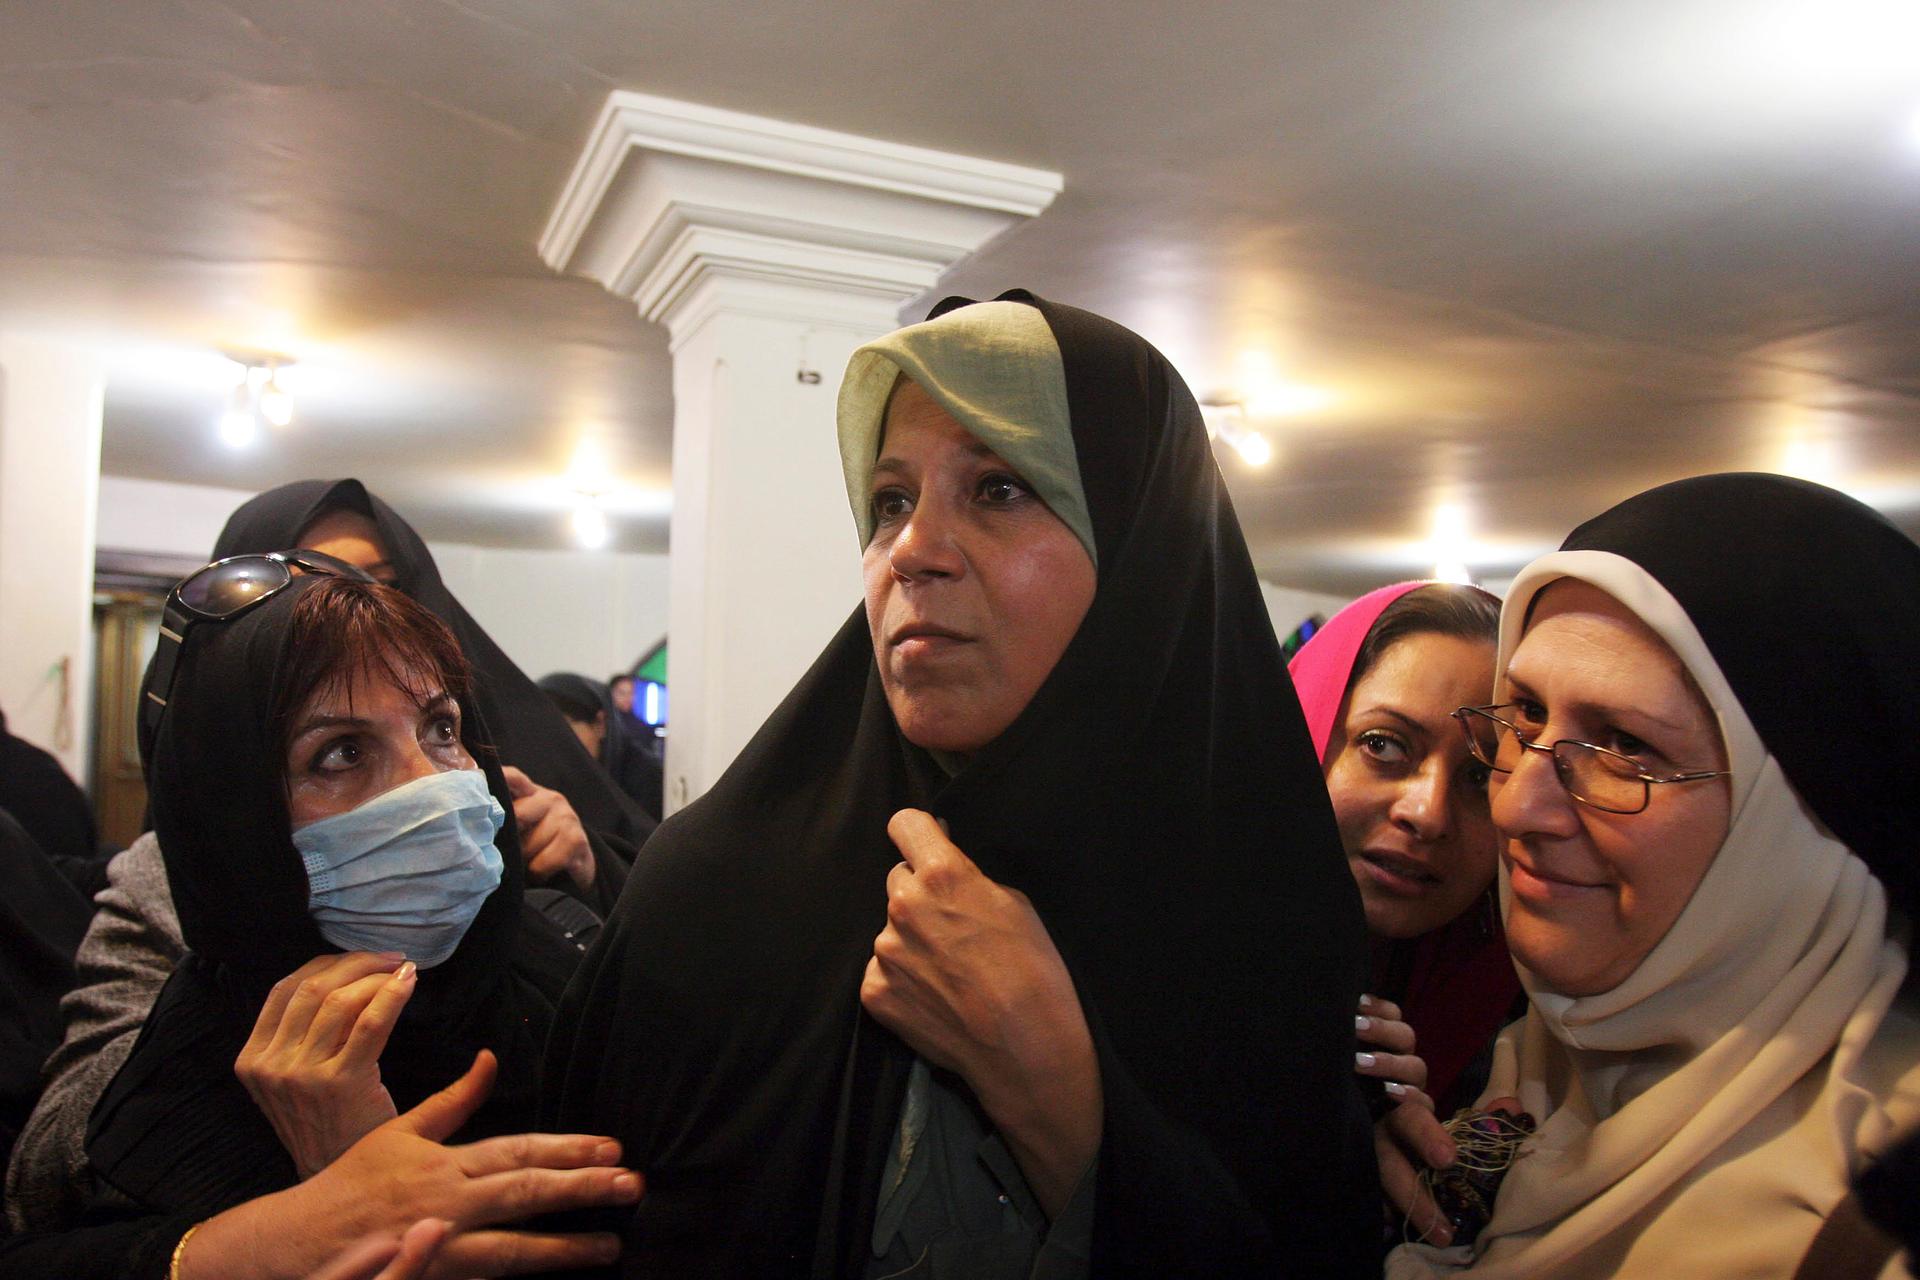 Faezeh Rafsanjani, the daughter of former Iranian president Akbar Hashemi Rafsanjani, at a protest at the Ghoba mosque in northern Tehran in 2009.